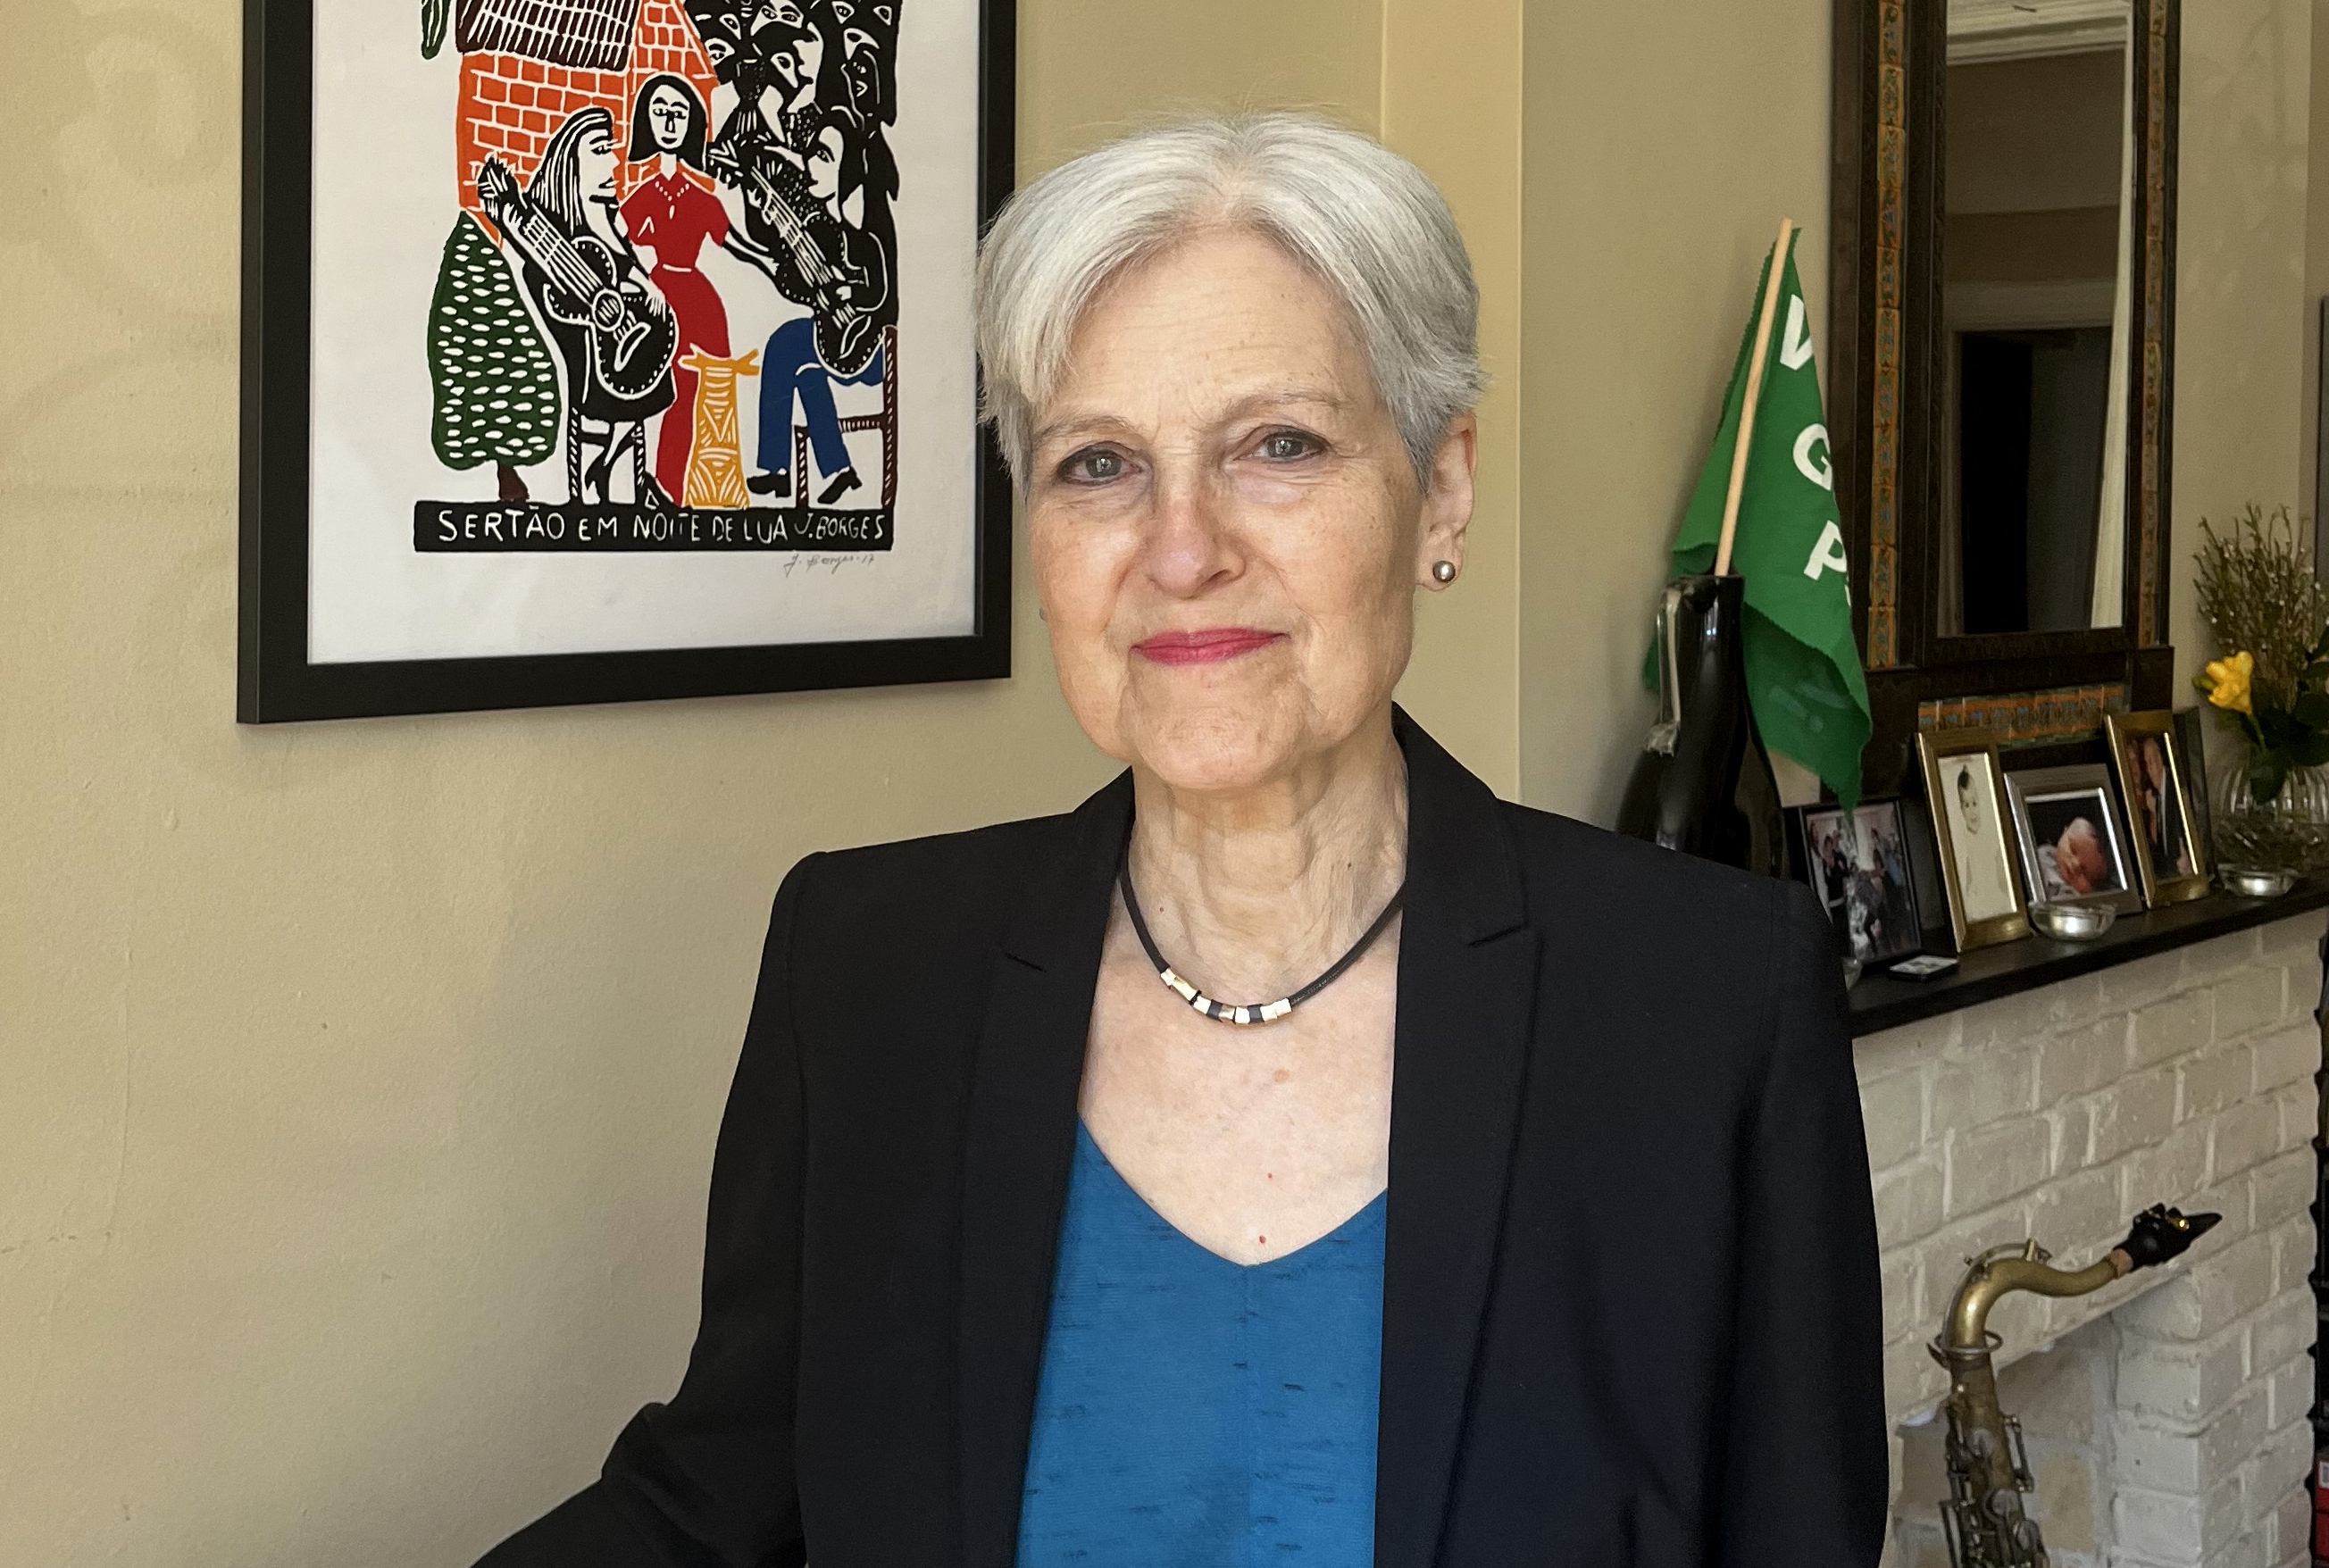 Jill Stein handcuffed by police at college protest: Video